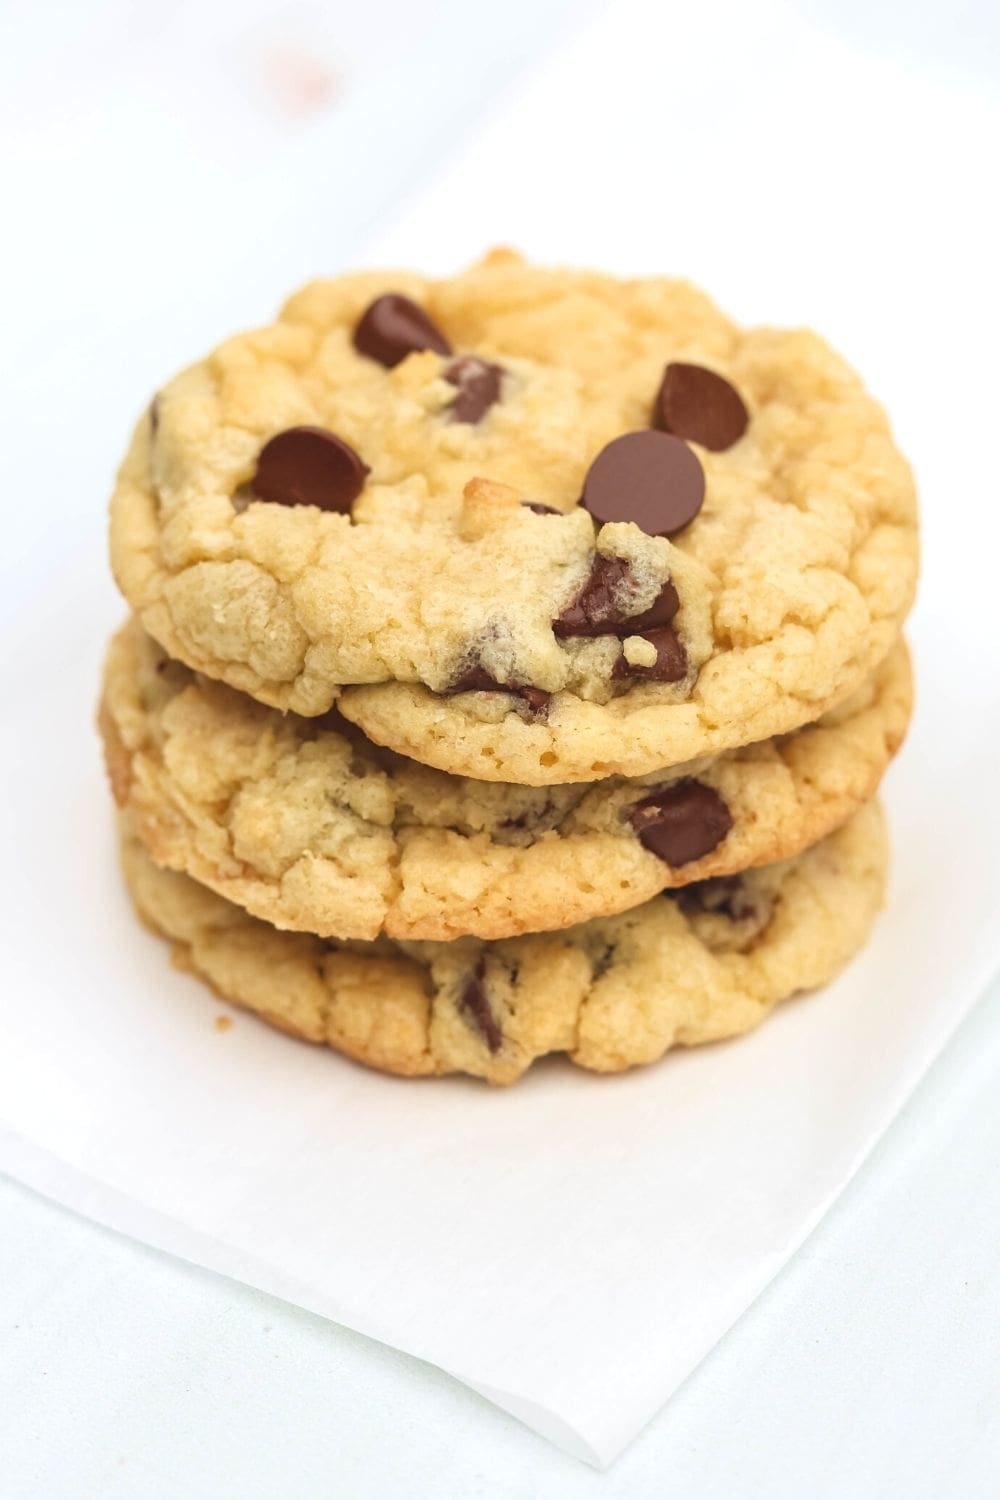 close-up view of a stack of three soft and chewy Bisquick chocolate chip cookies on a piece of parchment paper